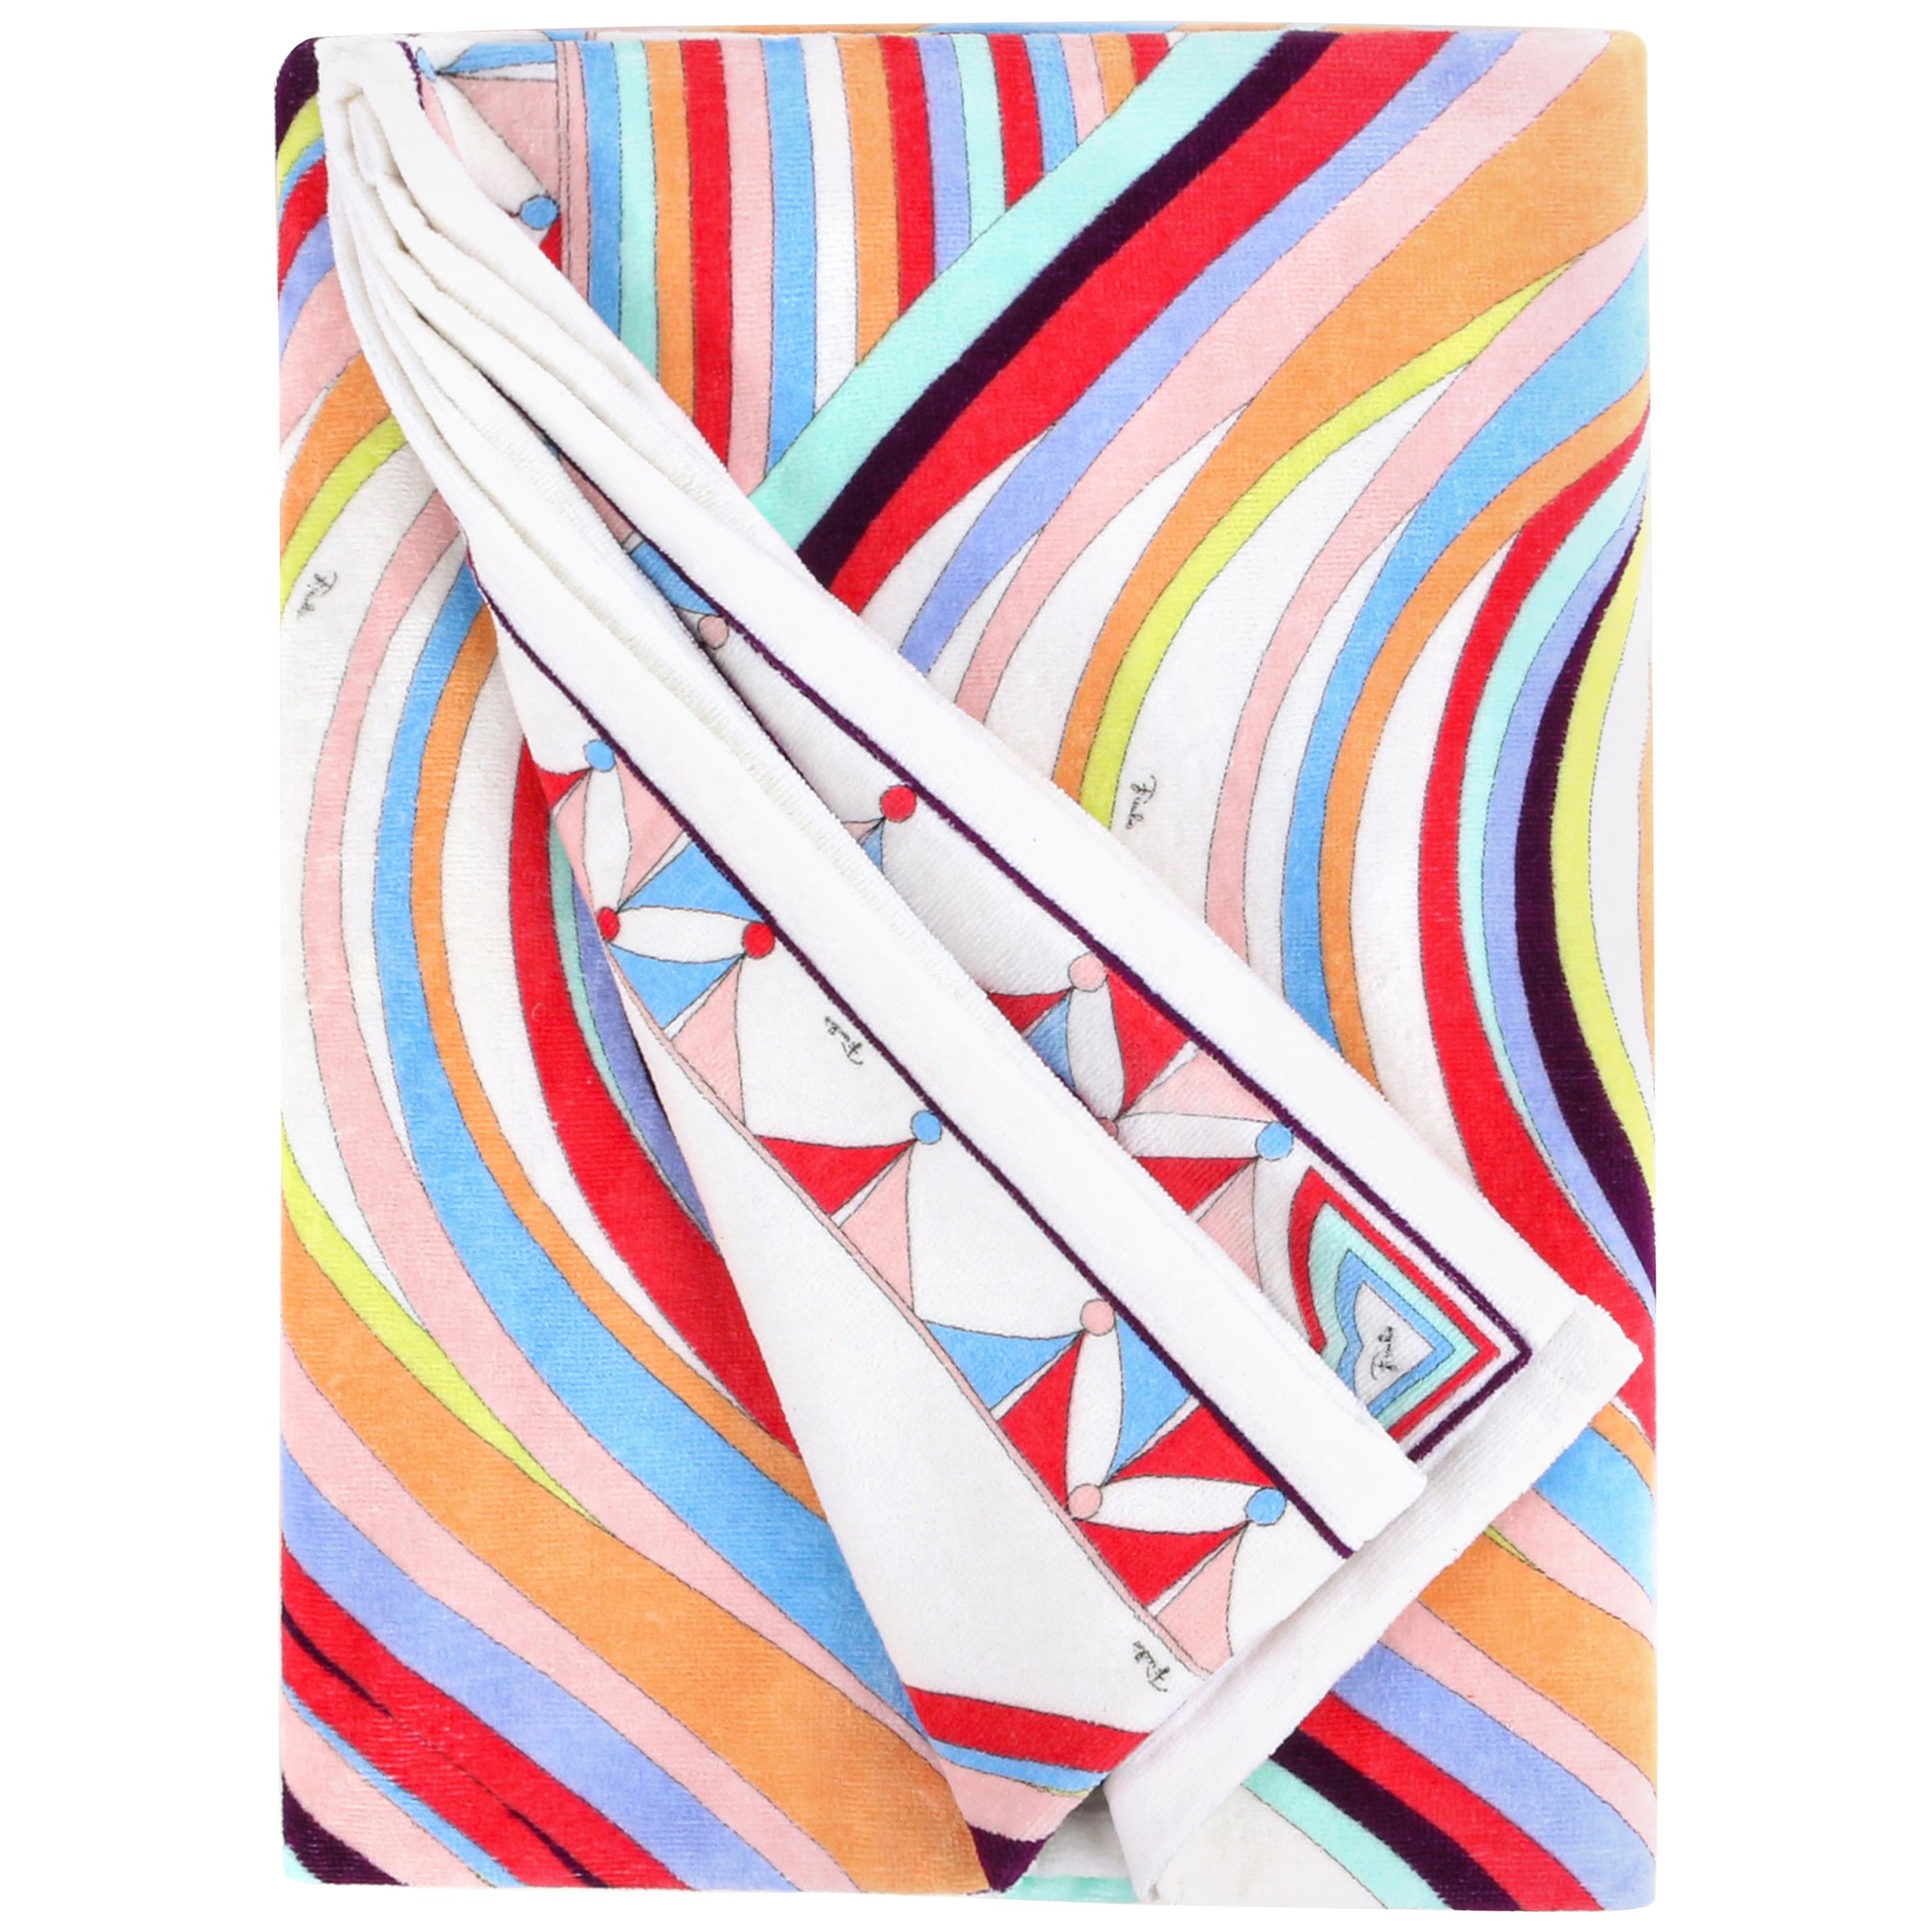 EMILIO PUCCI Multicolor Oversized Abstract Wave Signature Print Beach Pool Towel